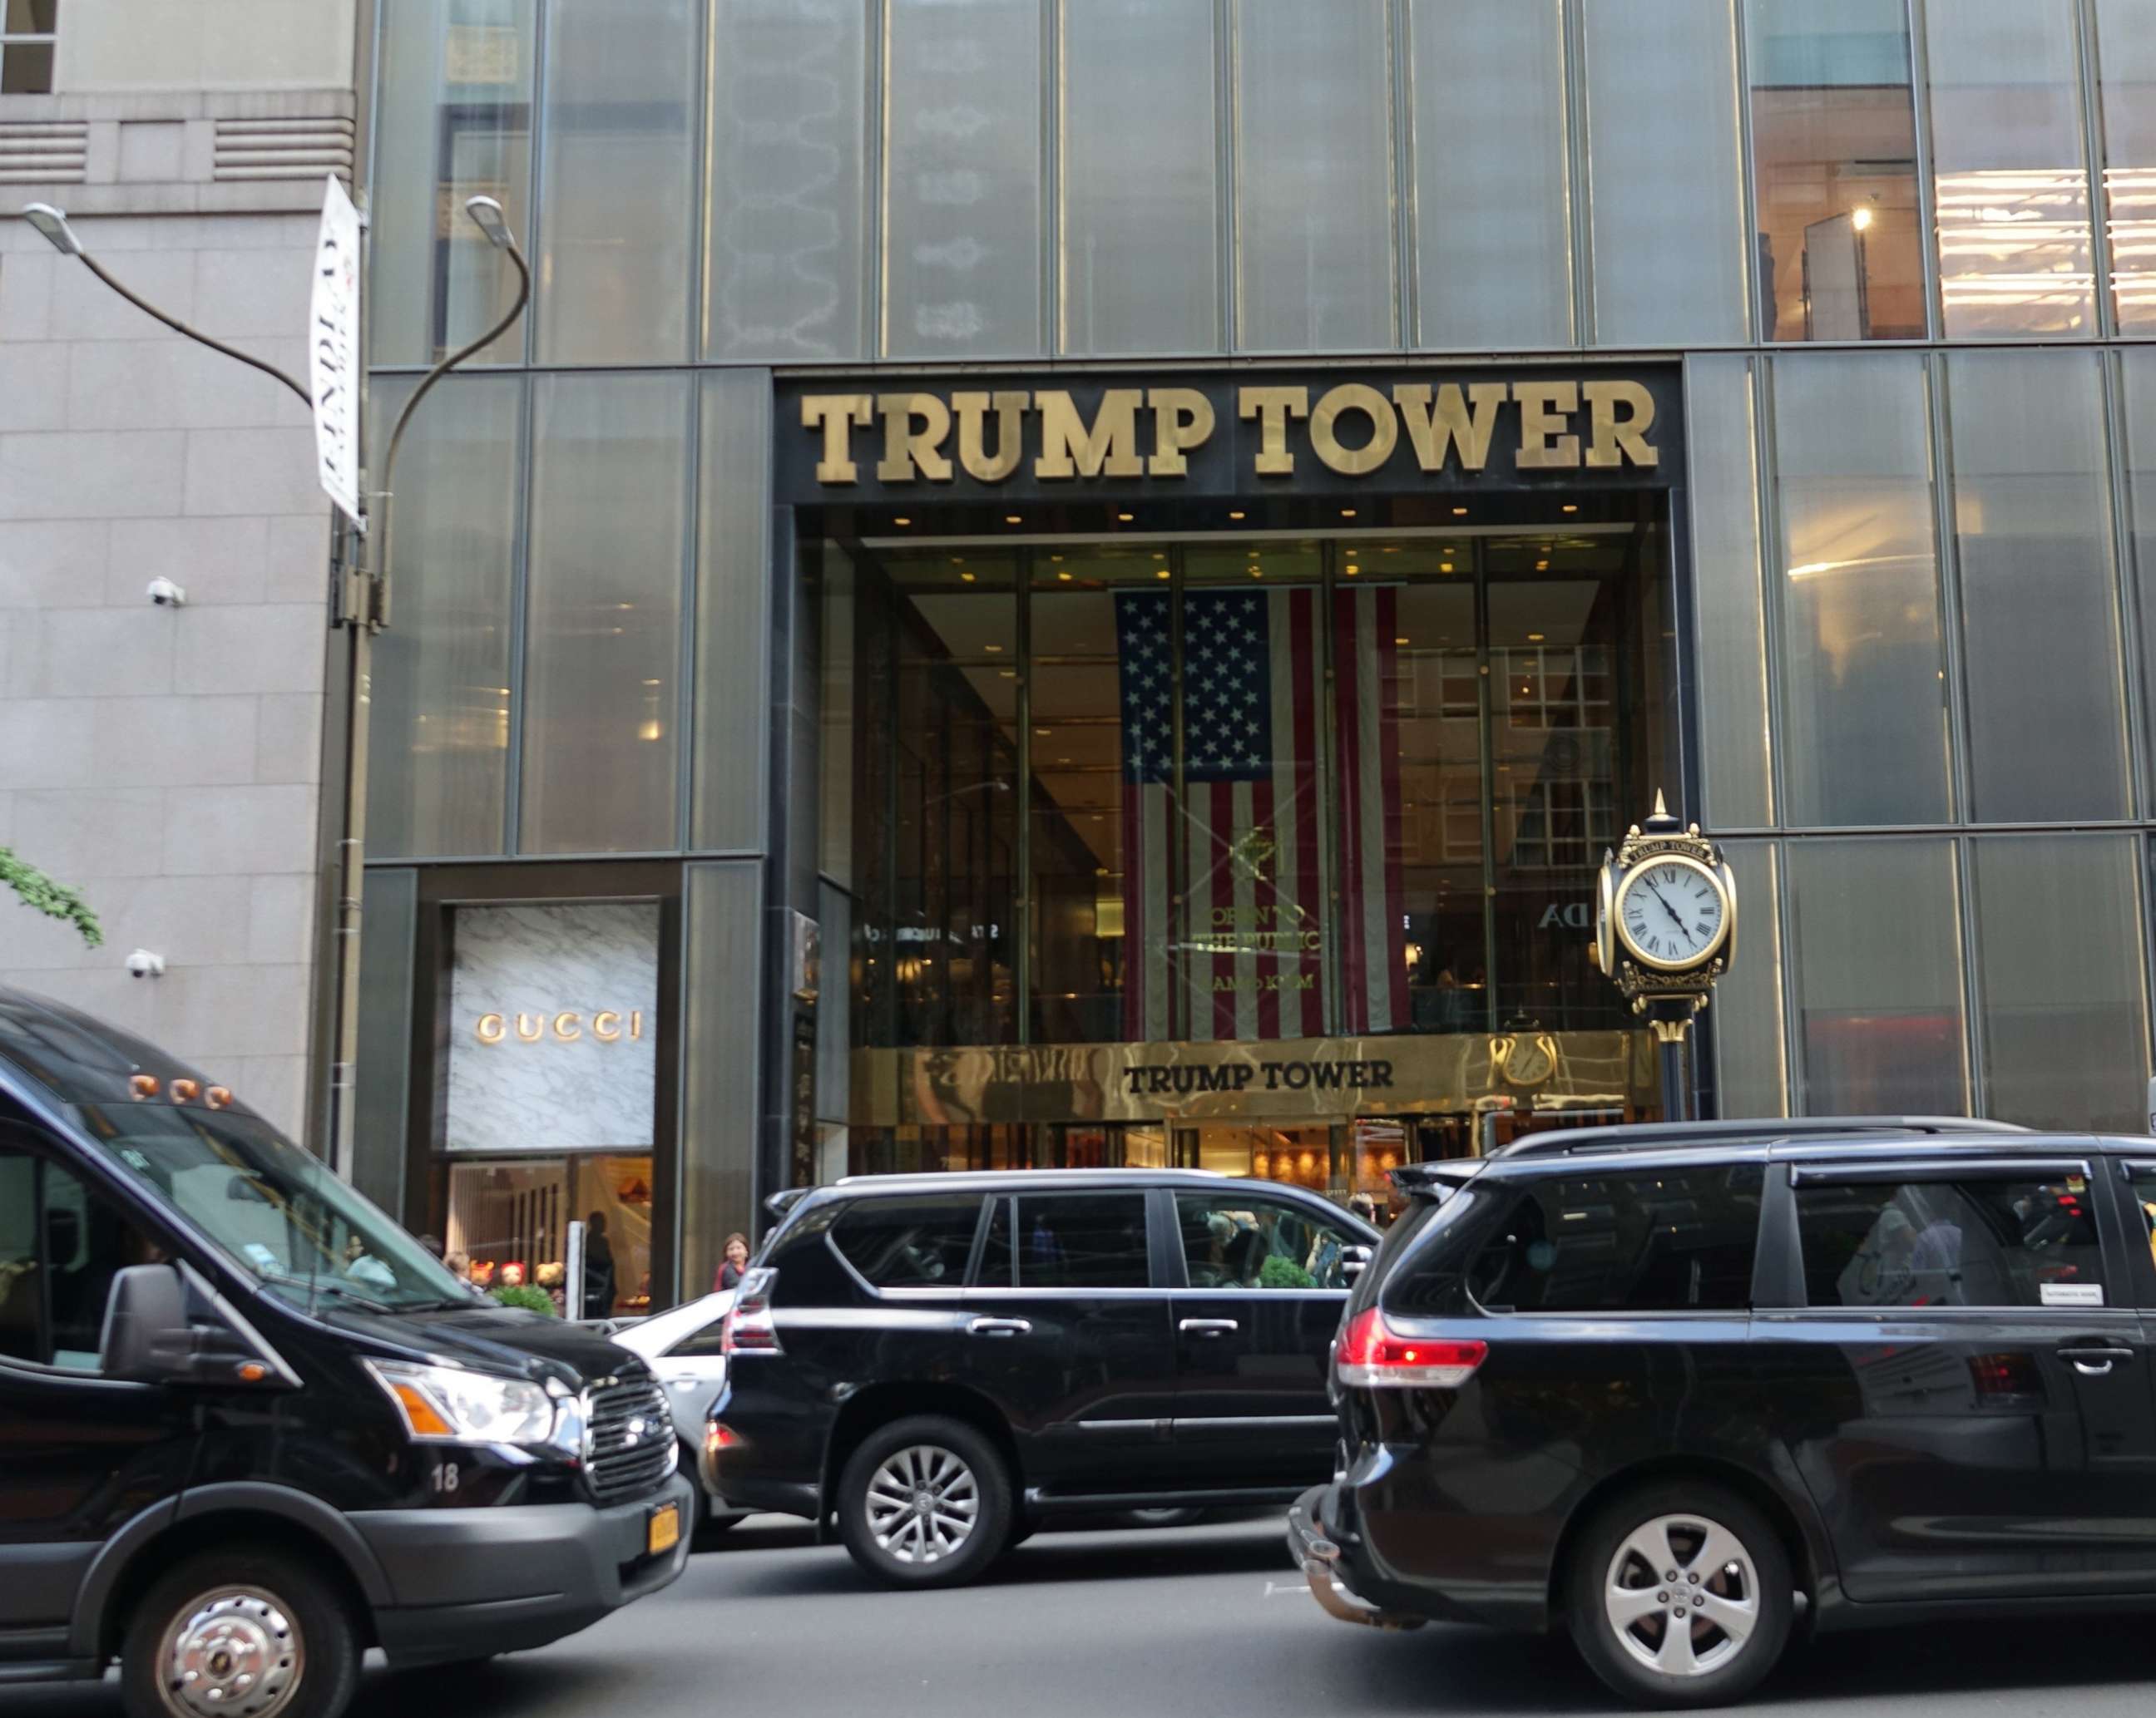 PHOTO: In this Sept. 14, 2019, file photo, the entrance to Trump Tower is shown in New York.